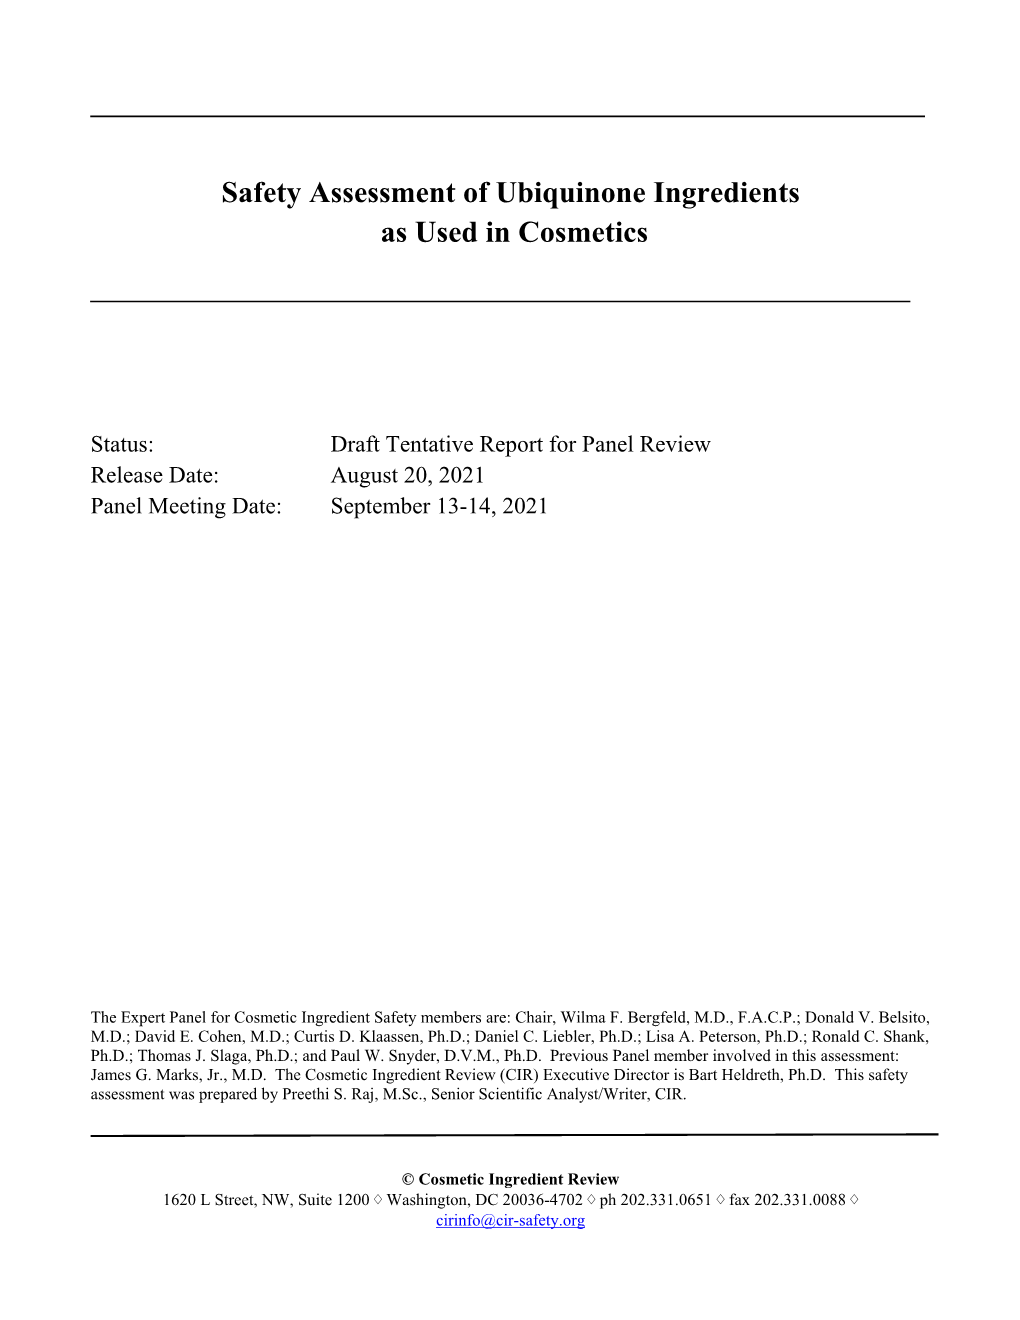 Safety Assessment of Ubiquinone Ingredients As Used in Cosmetics